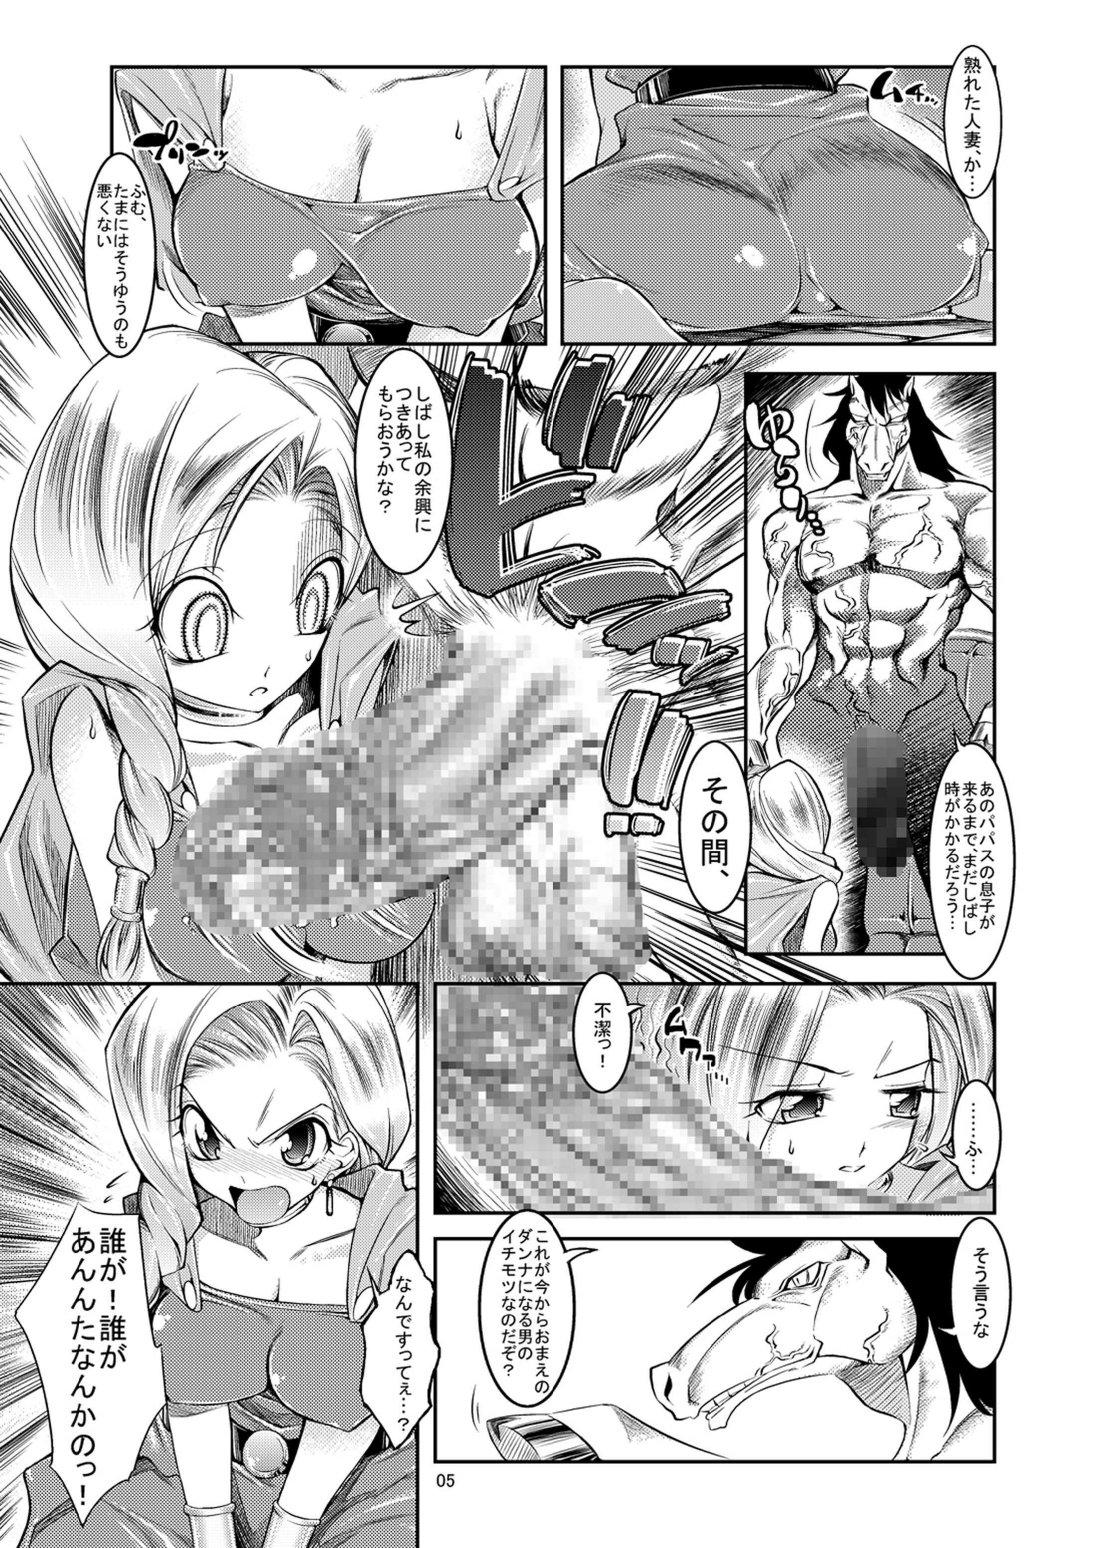 18 Year Old Porn Medapani Quest Bianca-hen - Dragon quest v Shaking - Page 5